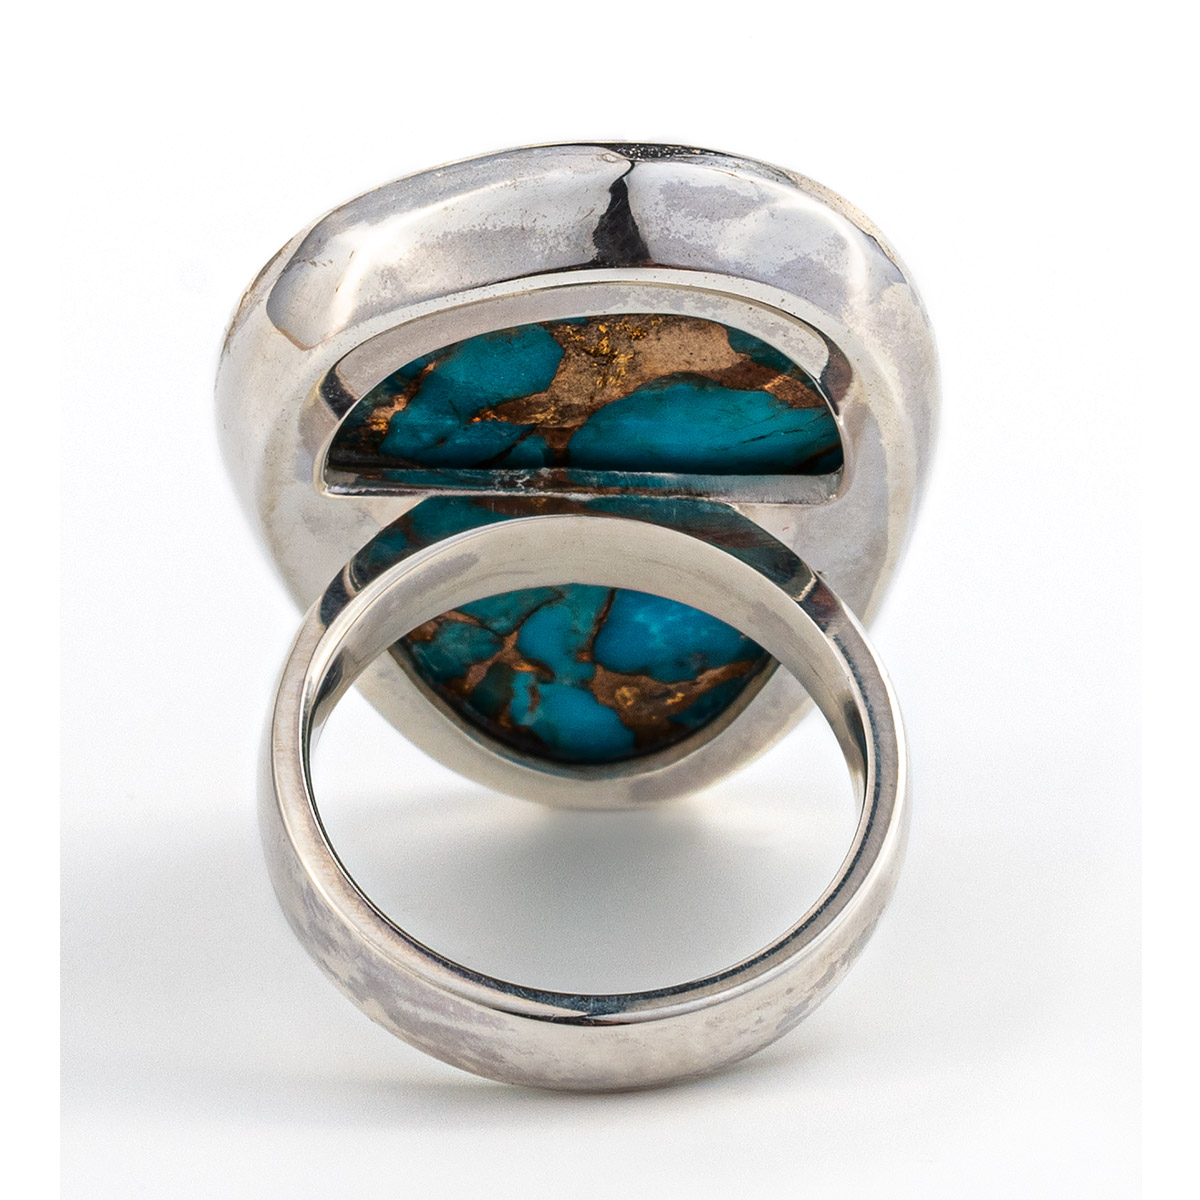 Natural Copper Turquoise Handmade Unique 925 Sterling Silver Ring 7.75 B1357 